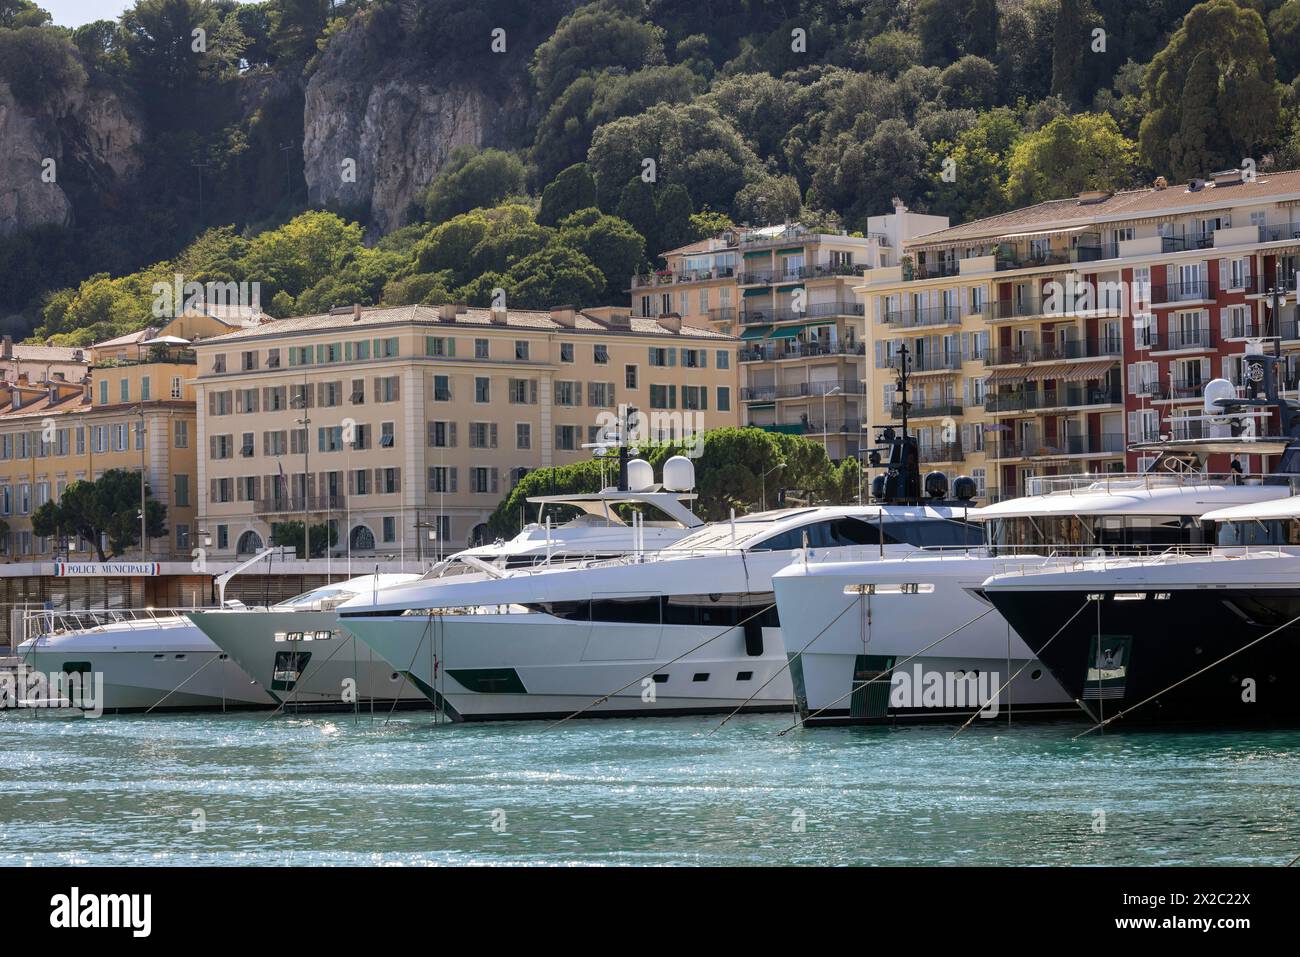 Yachts in the harbour at Nice, Cote d'Azur, France Stock Photo